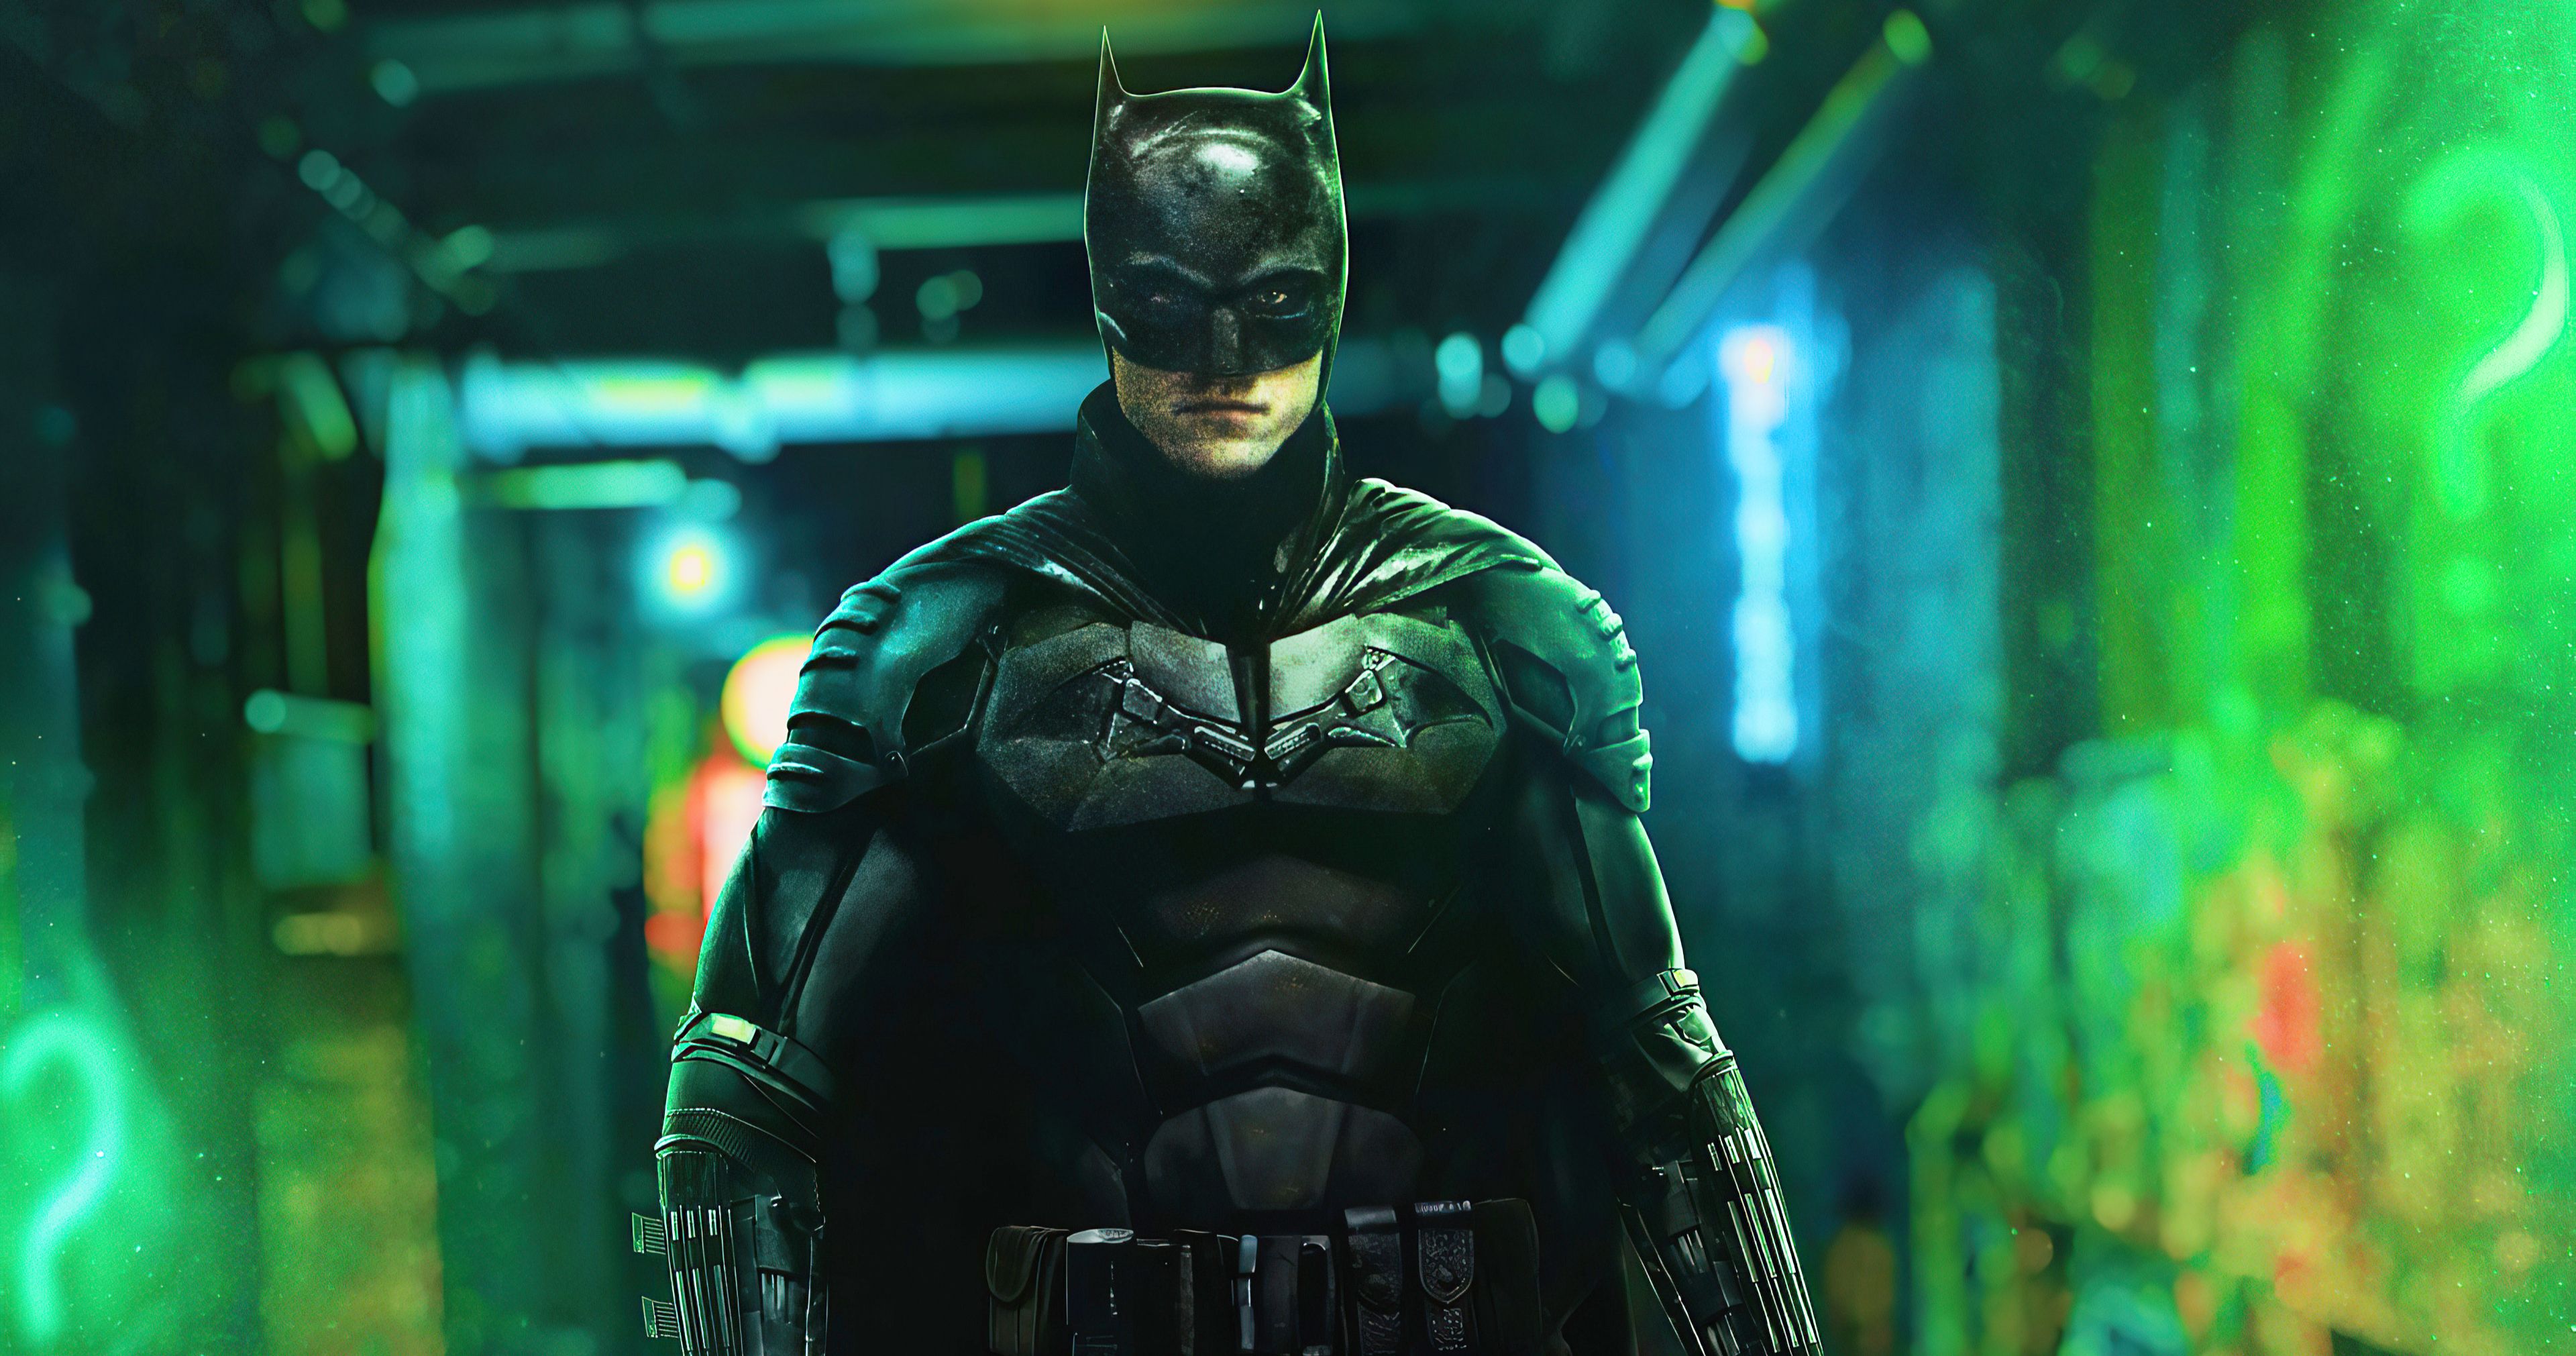 The Batman Co-Star Breaks Down Why Working with Director Matt Reeves Is So Great